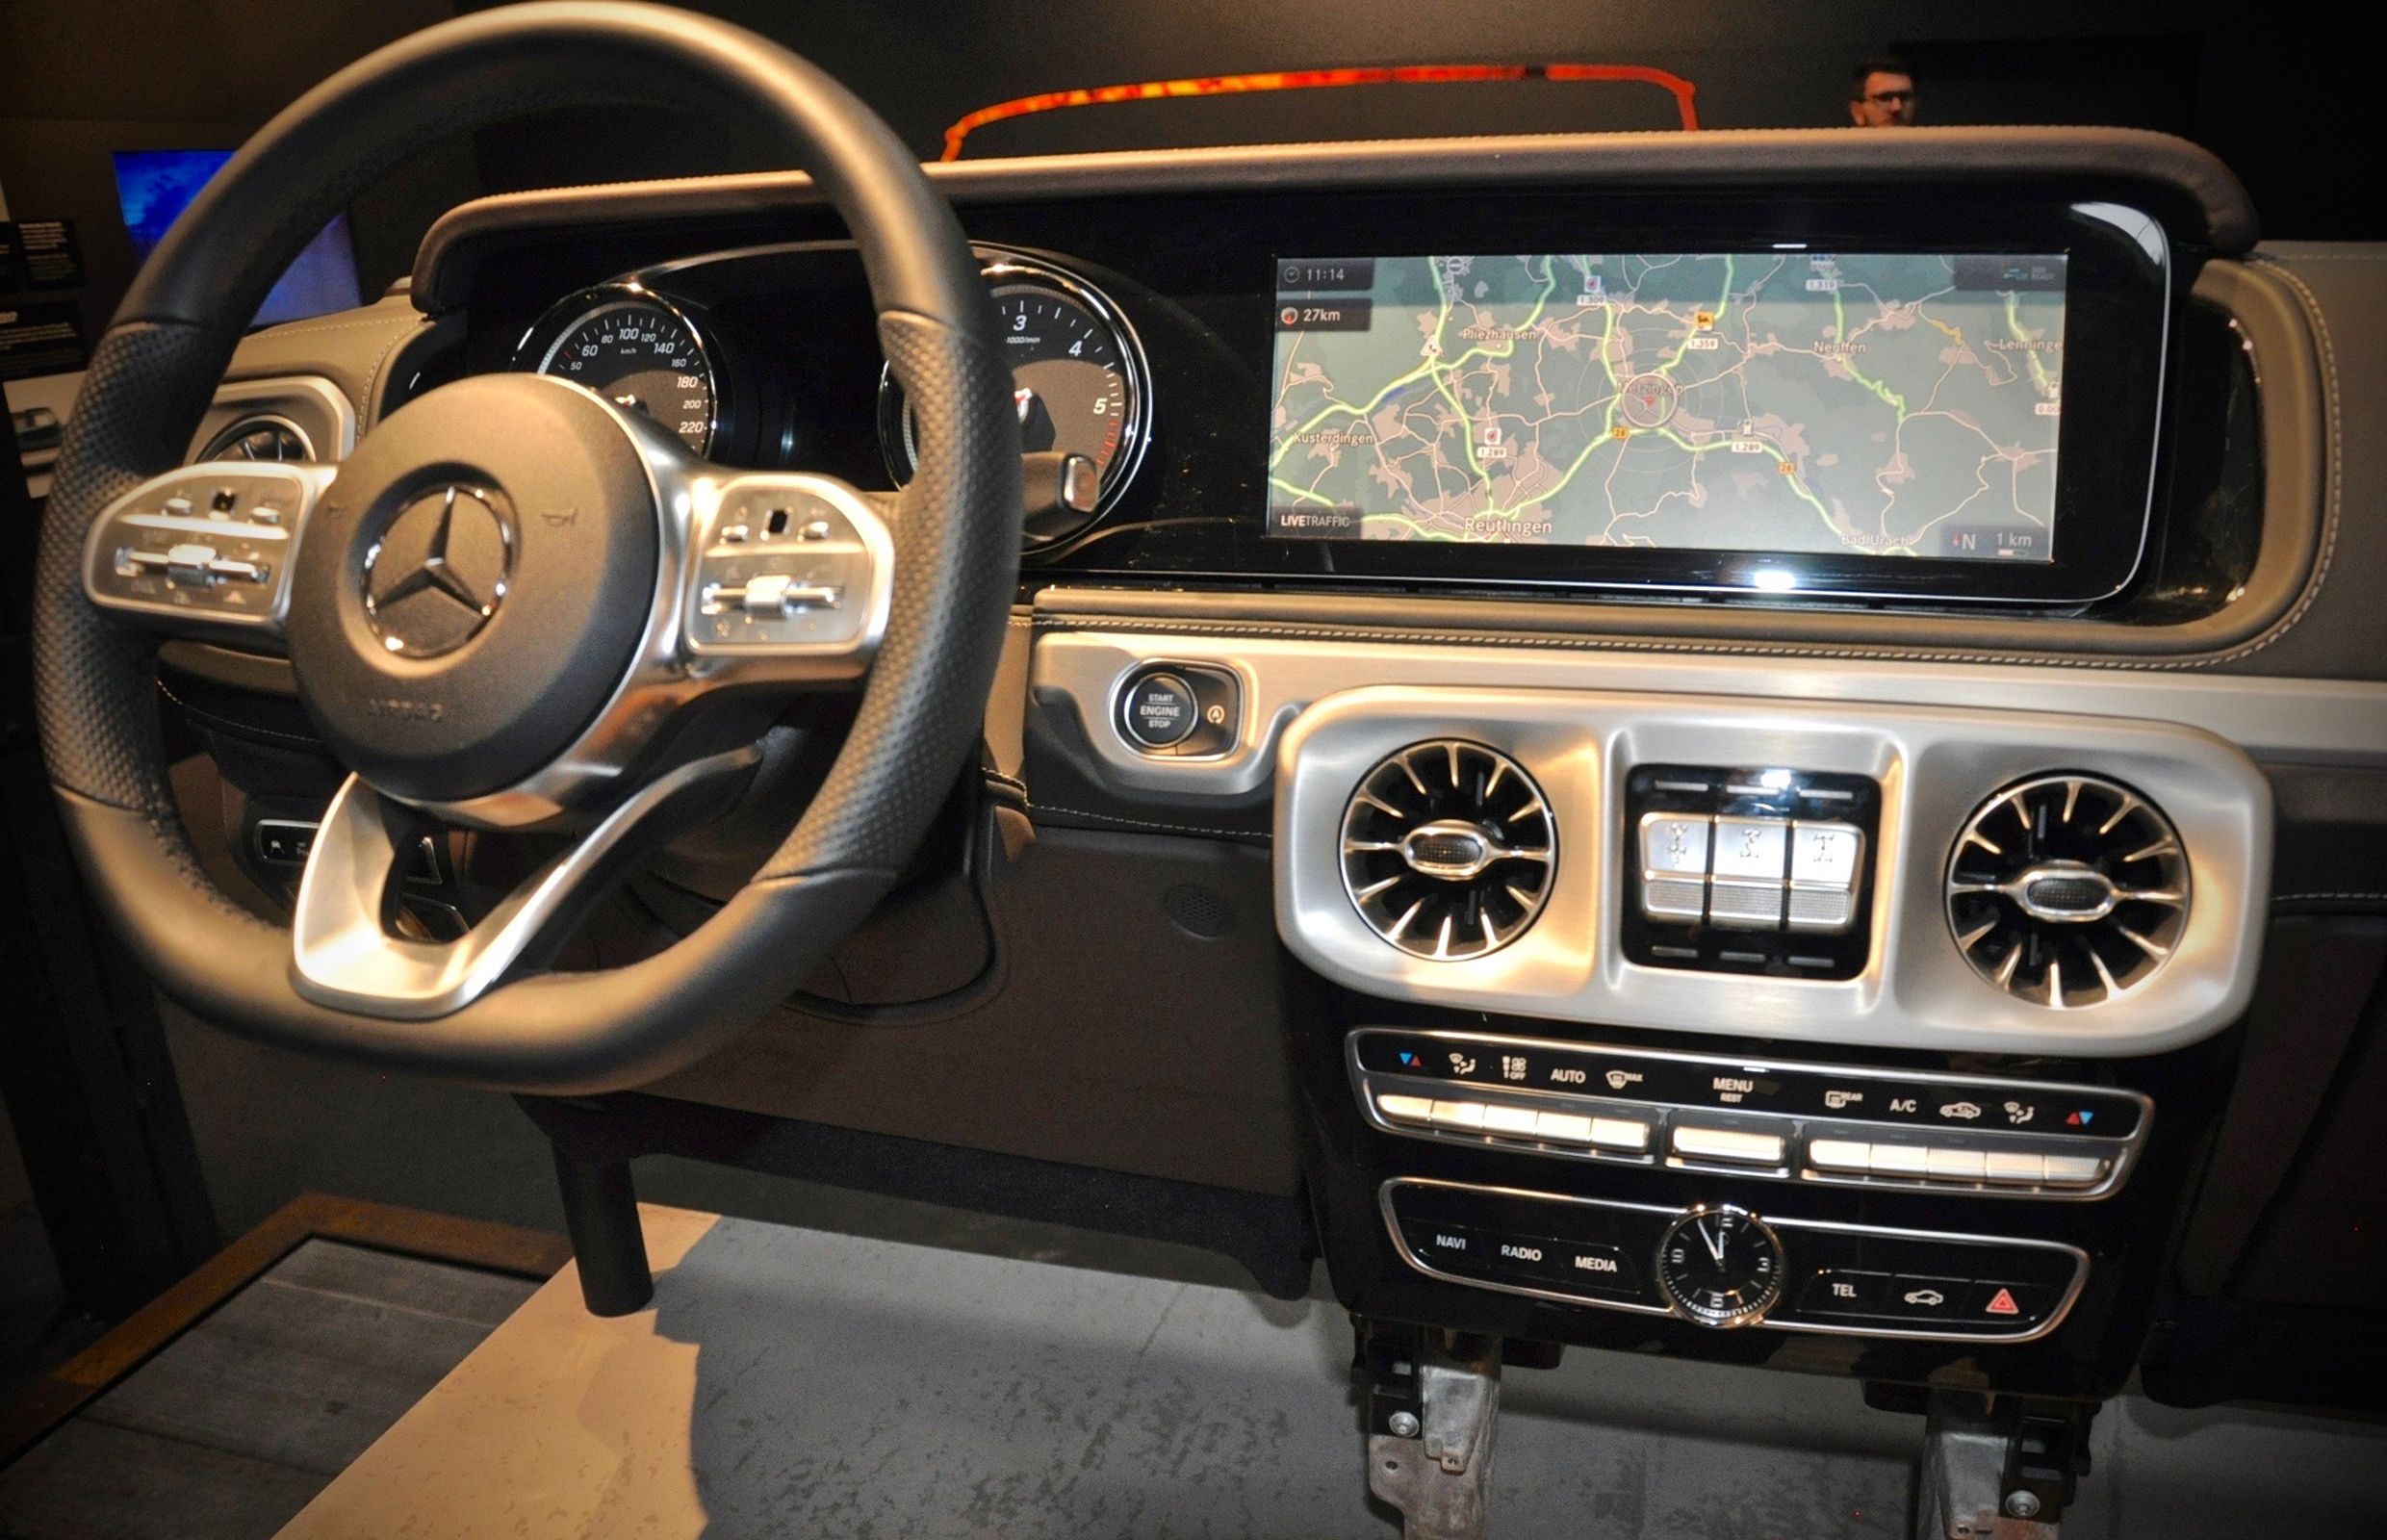 Used 2017 Mercedes-Benz G-Class for Sale in Rome, GA (with Photos) -  CarGurus